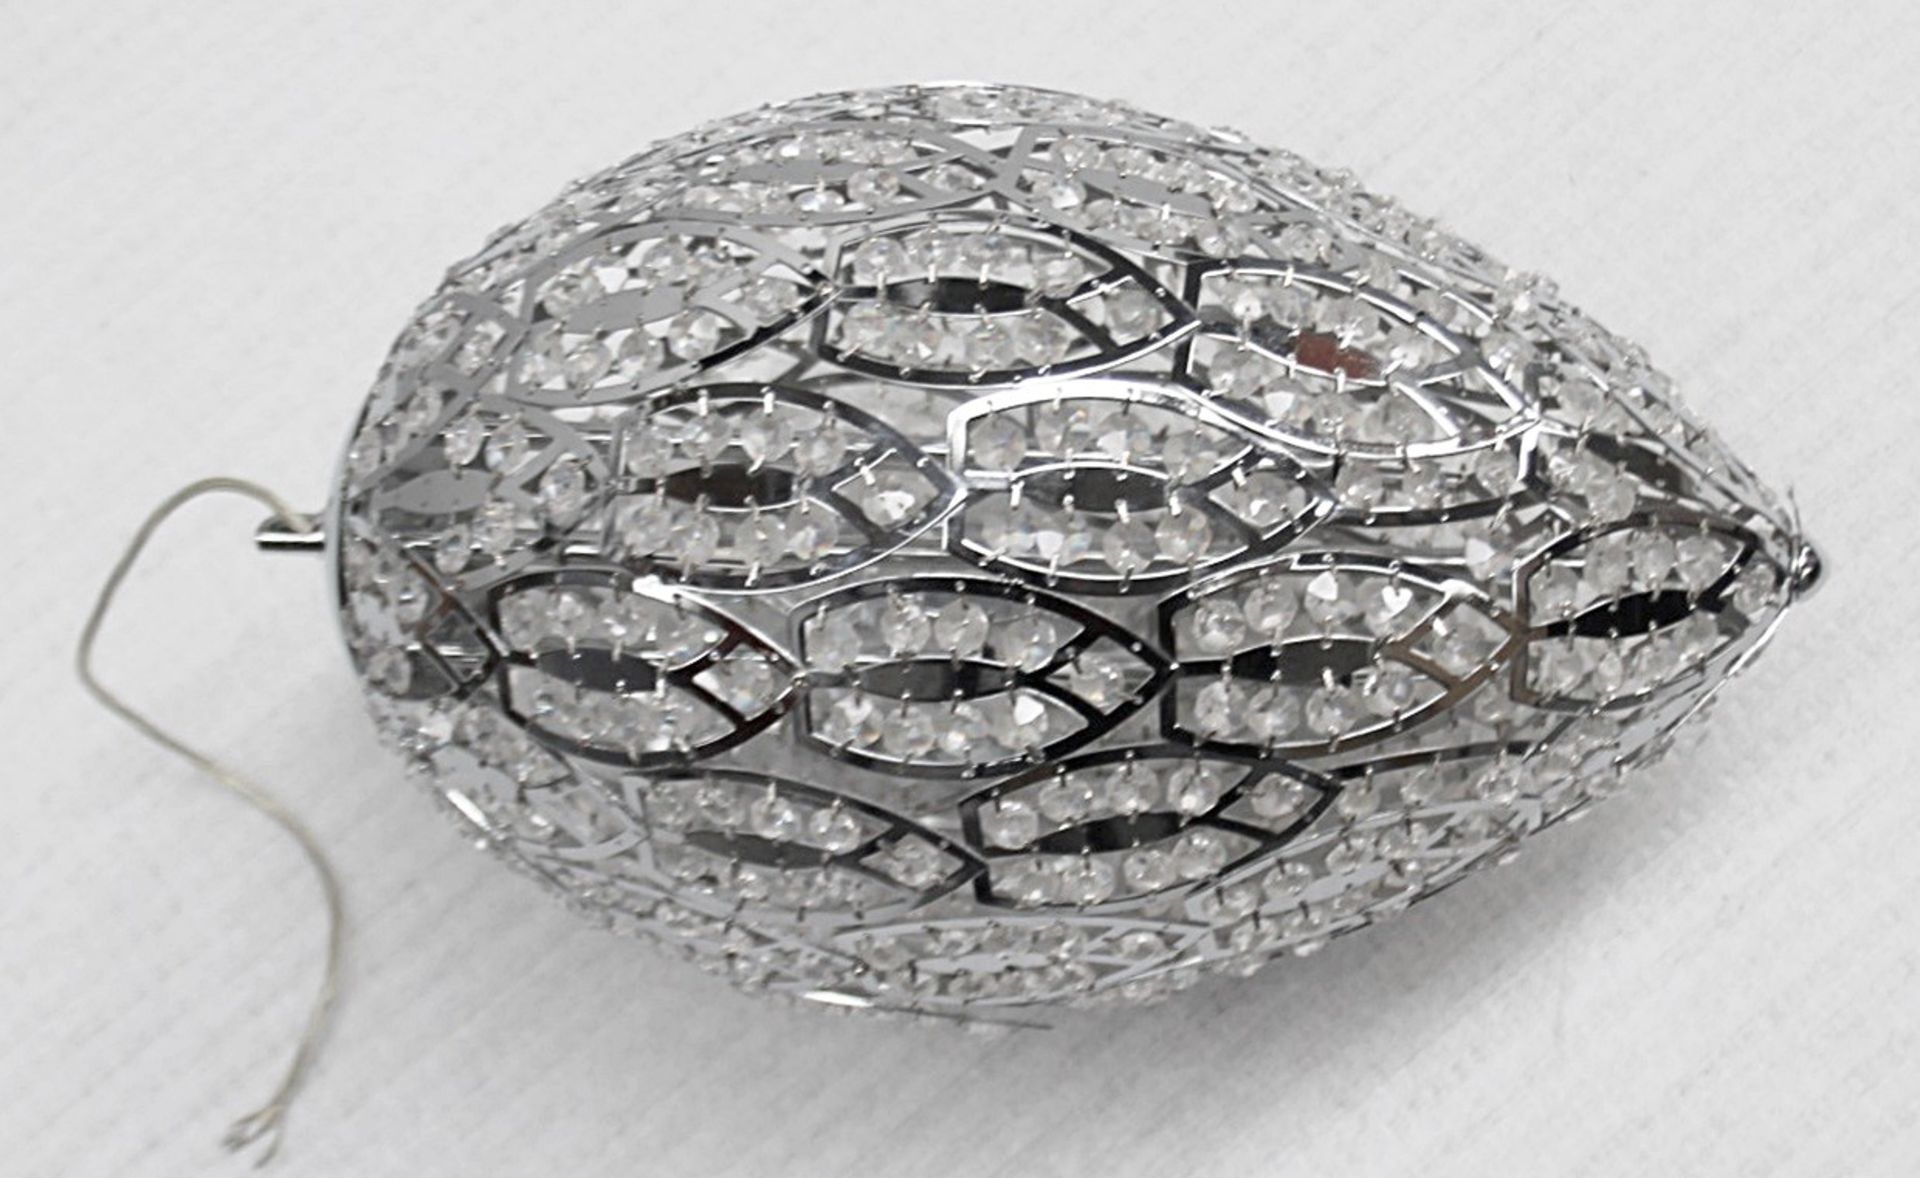 1 x High-end Italian LED Egg-Shaped Light Fitting Encrusted In Premium ASFOUR Crystal - RRP £4,000 - Image 6 of 9